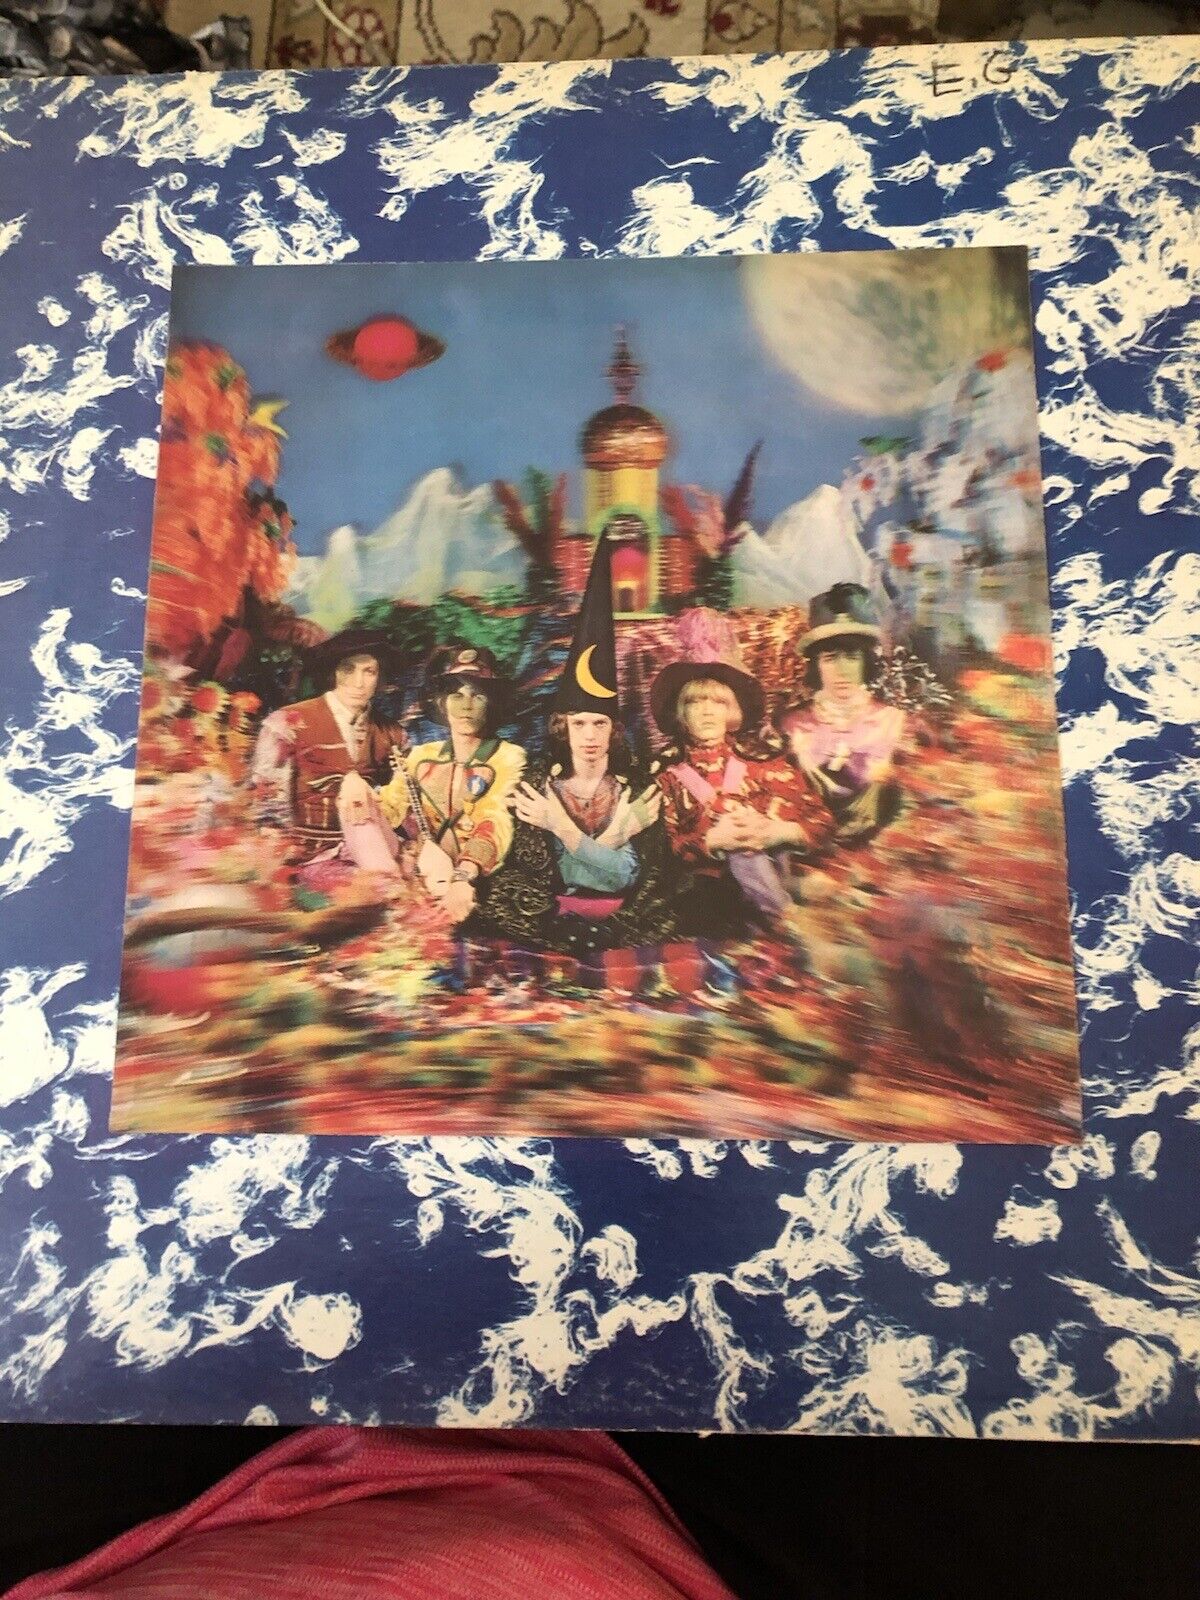 THE ROLLING STONES Their Satanic Majesties Request LONDON RECORDS 1967 MONO